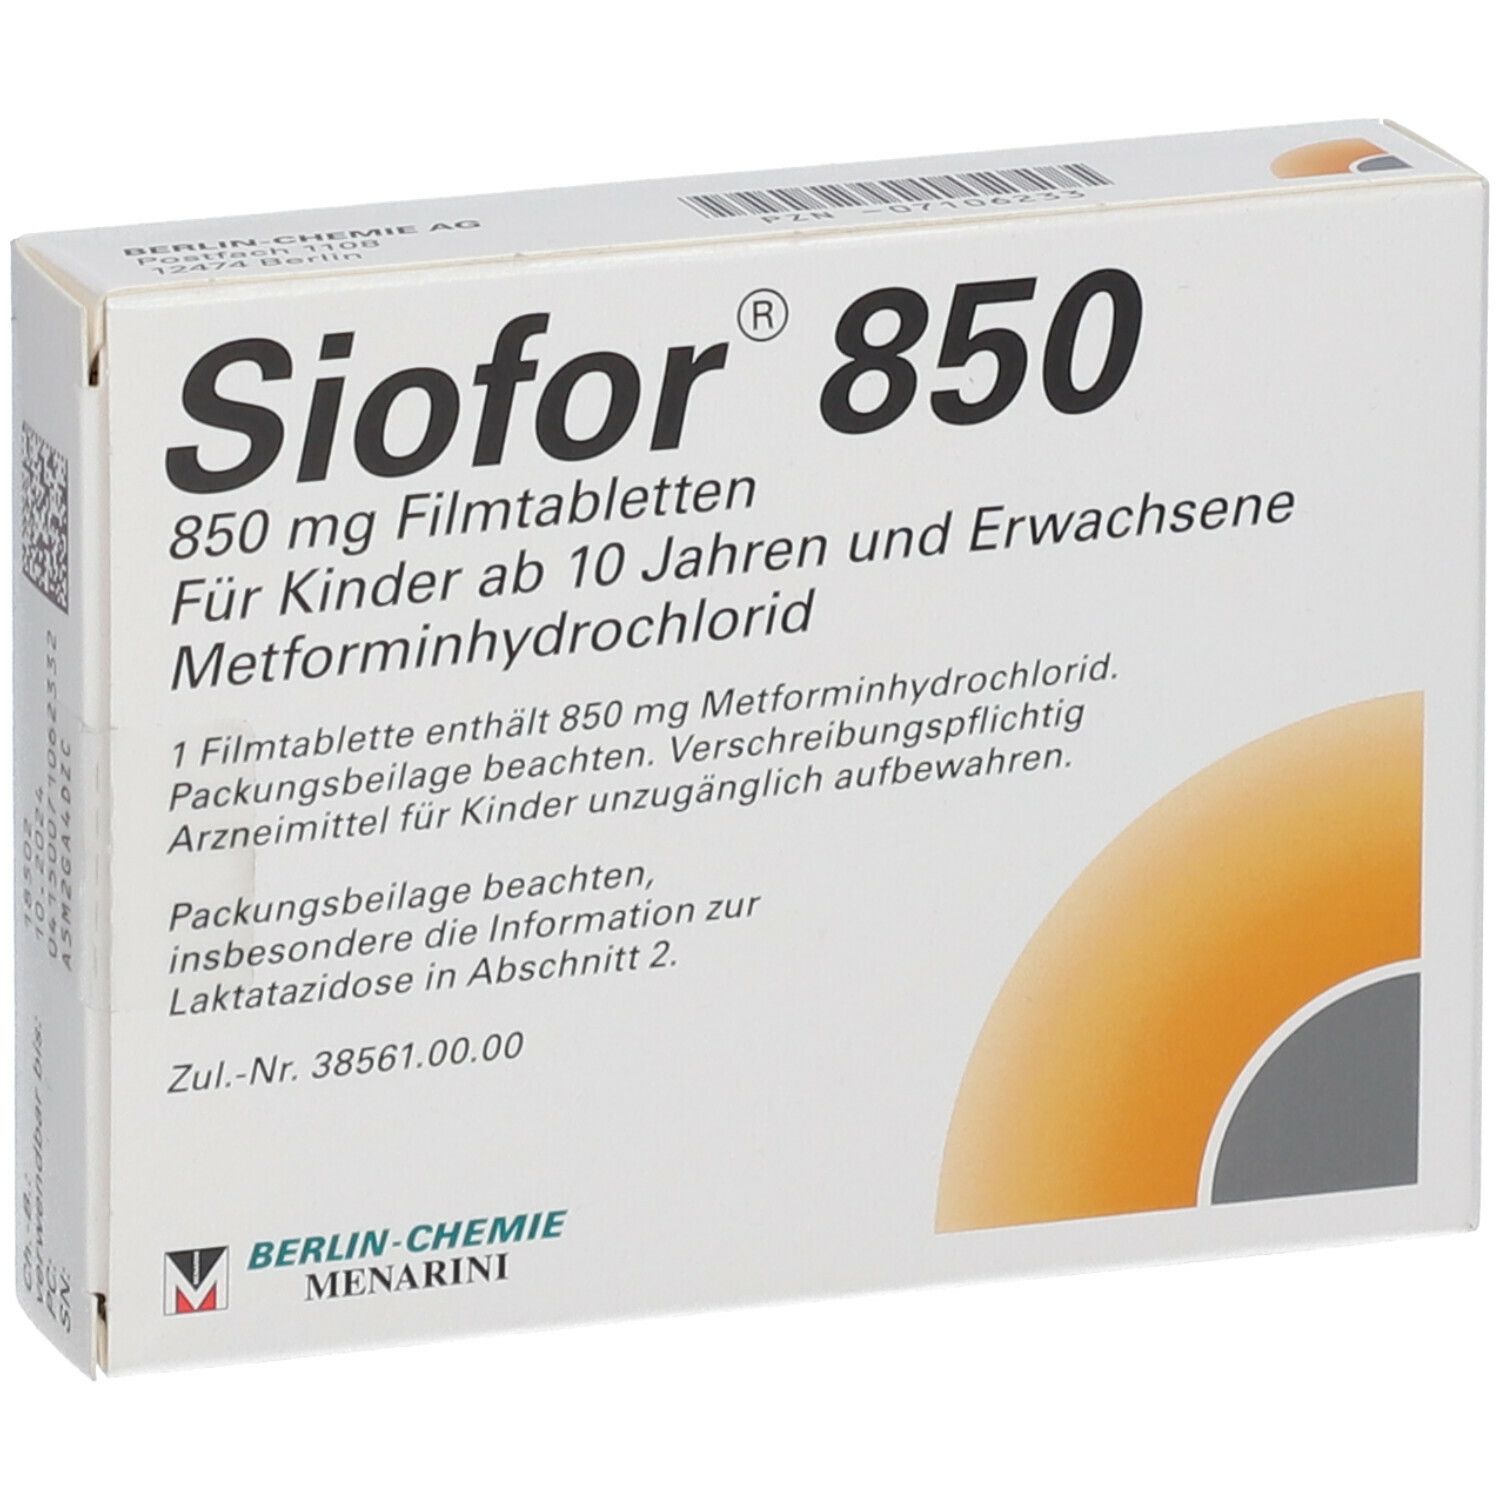 Siofor® 850